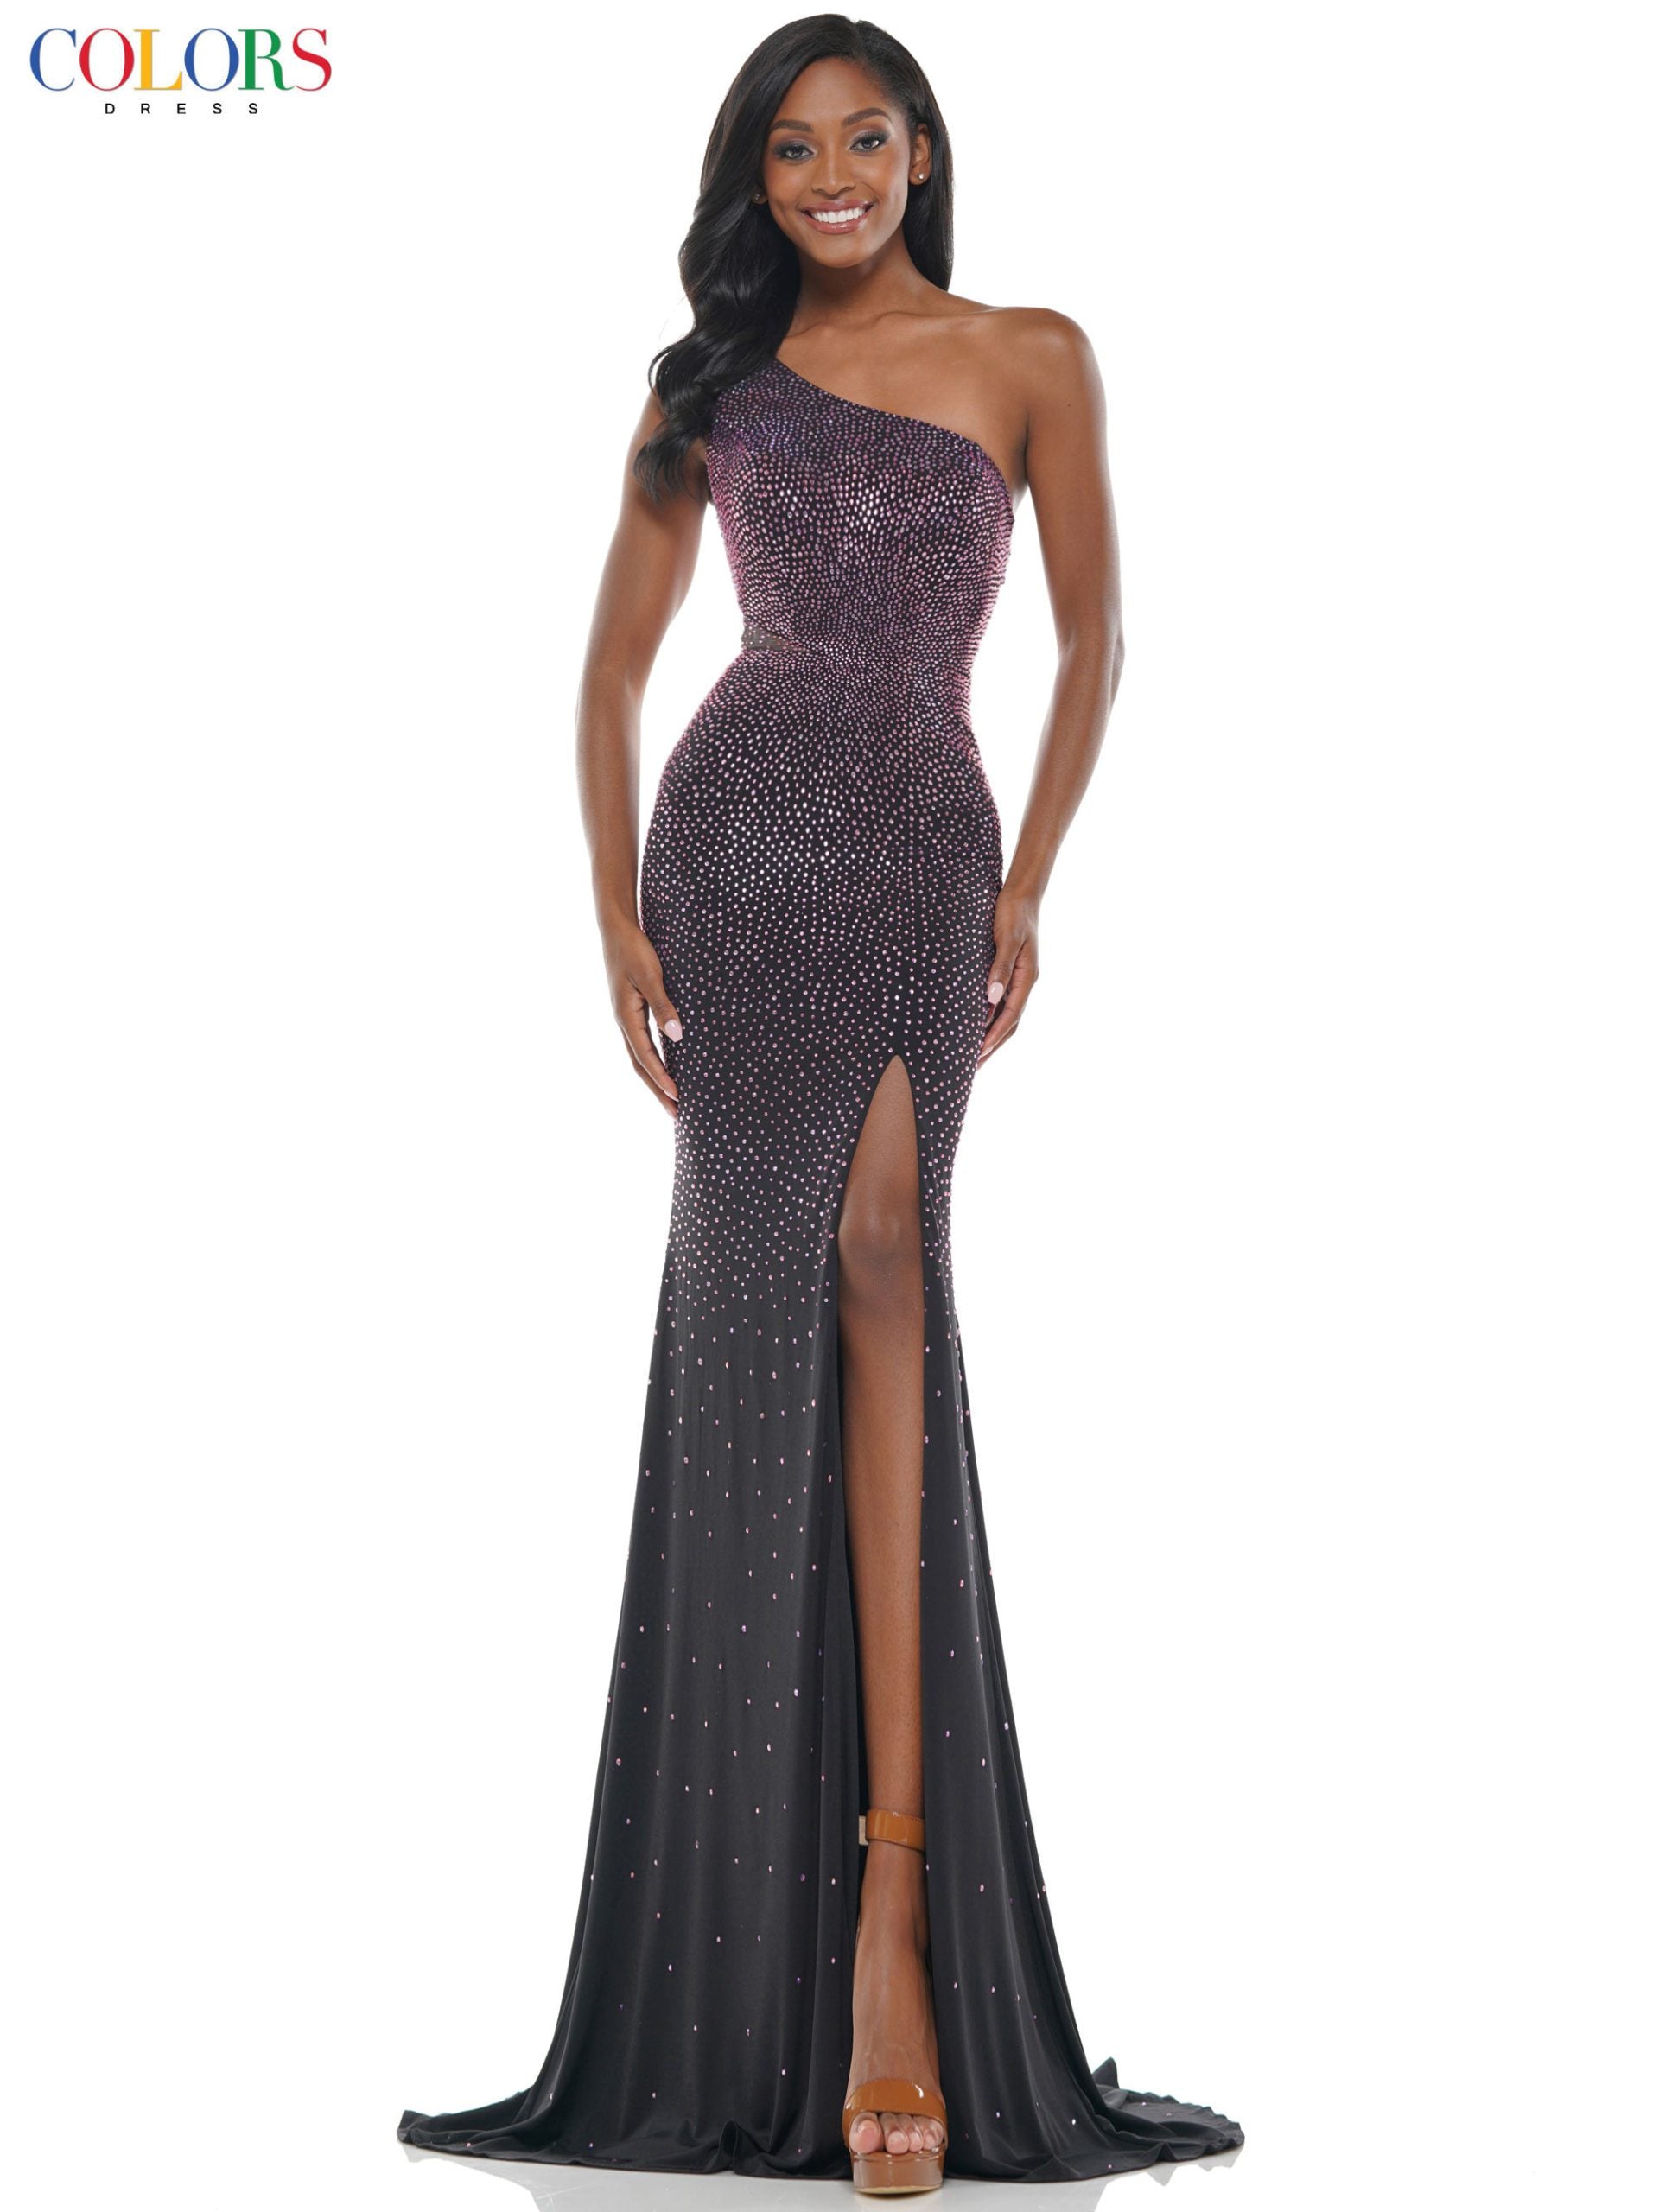 Colors 2647 Long Fitted one shoulder Embellished Prom Dress Pageant Gown 47″ one-shoulder jersey fit and flare dress with heat-set stones, side mesh cut out  Available Sizes: 0-22  Available Colors: Black/Hot Pink, Black/Green, Black/Clear